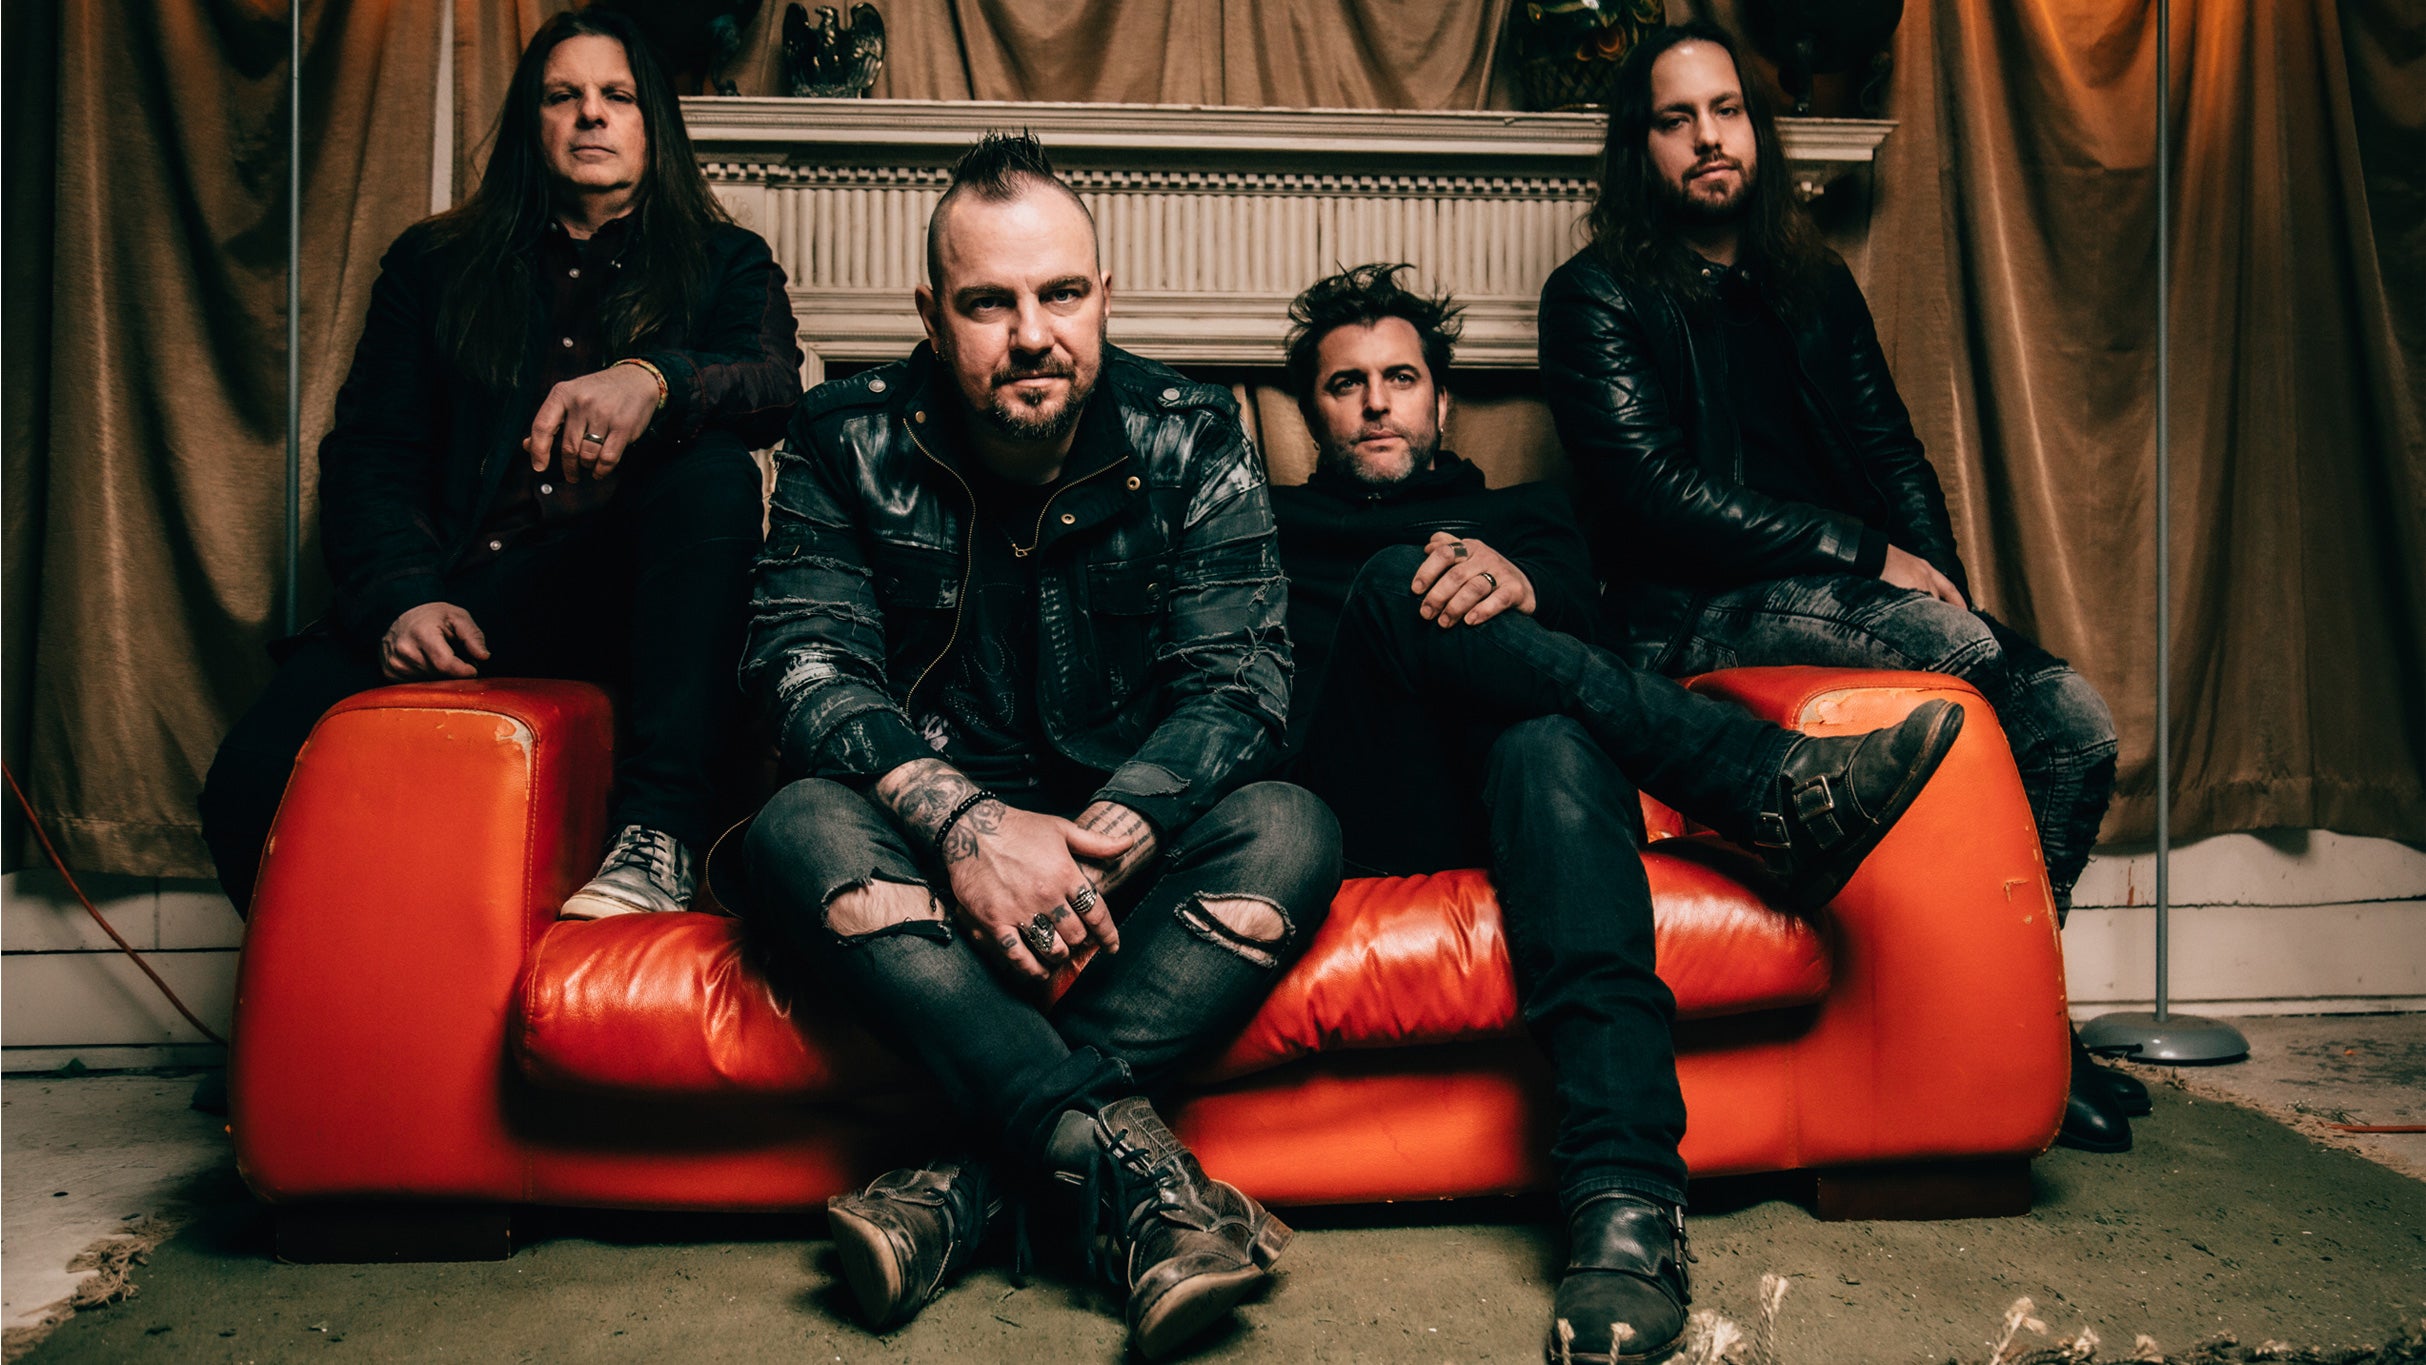 Saint Asonia presale password for early tickets in Baltimore